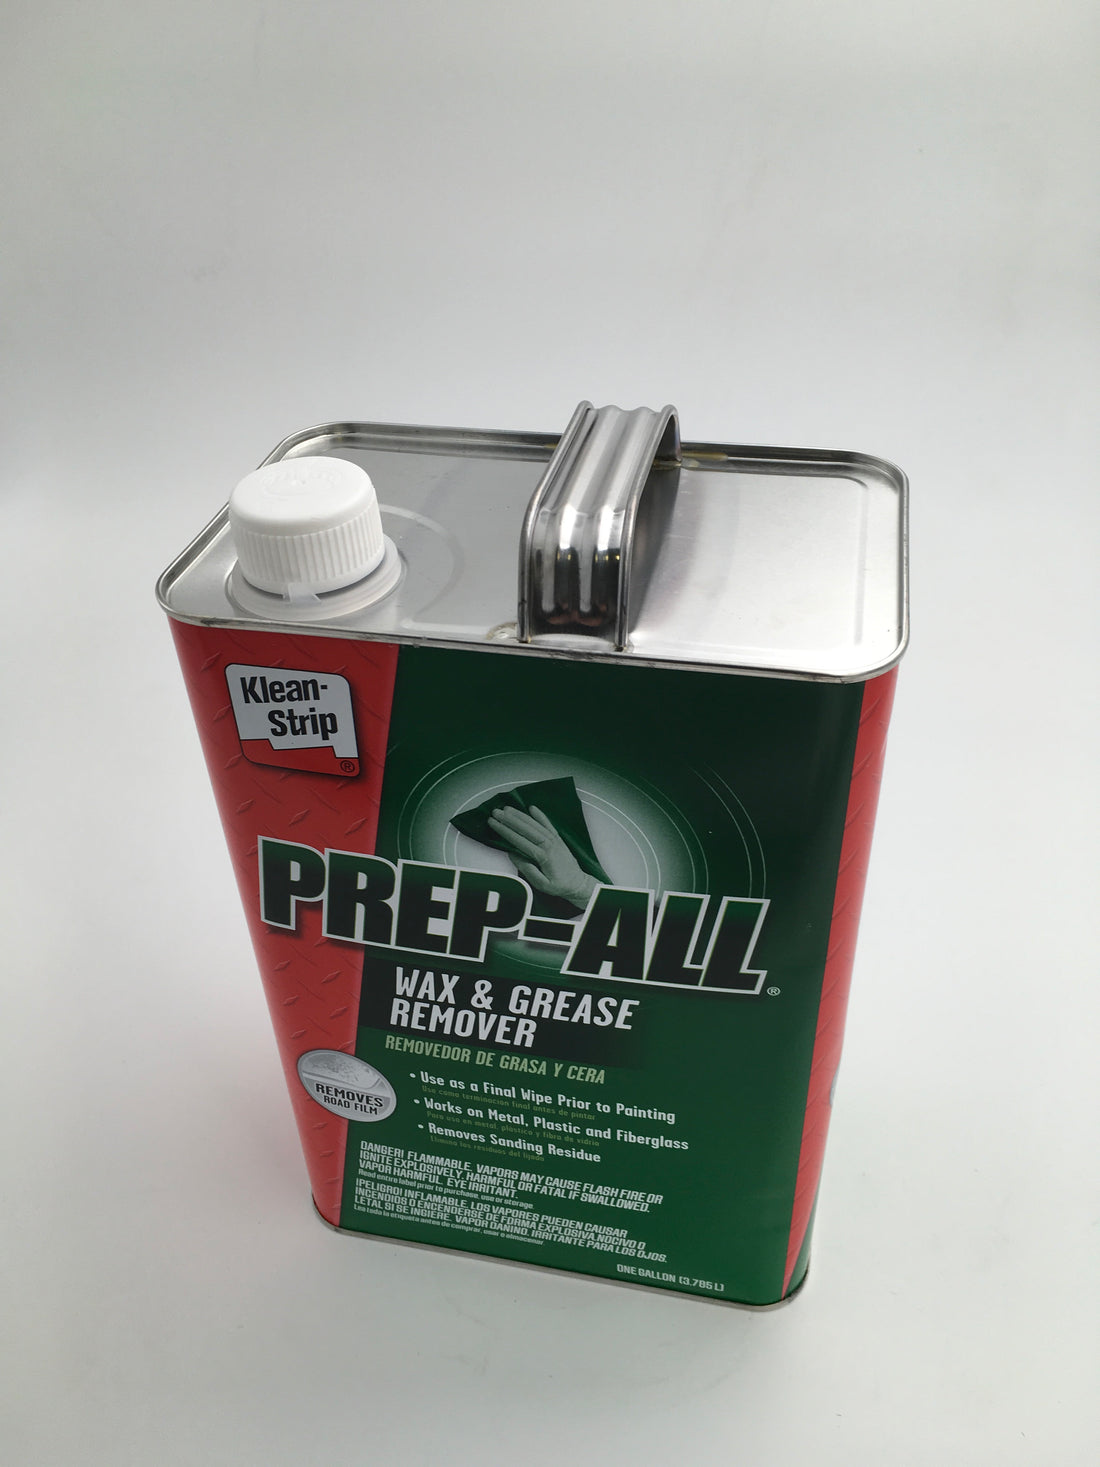 Prep-All Wax and Grease Remover - 1 Gal